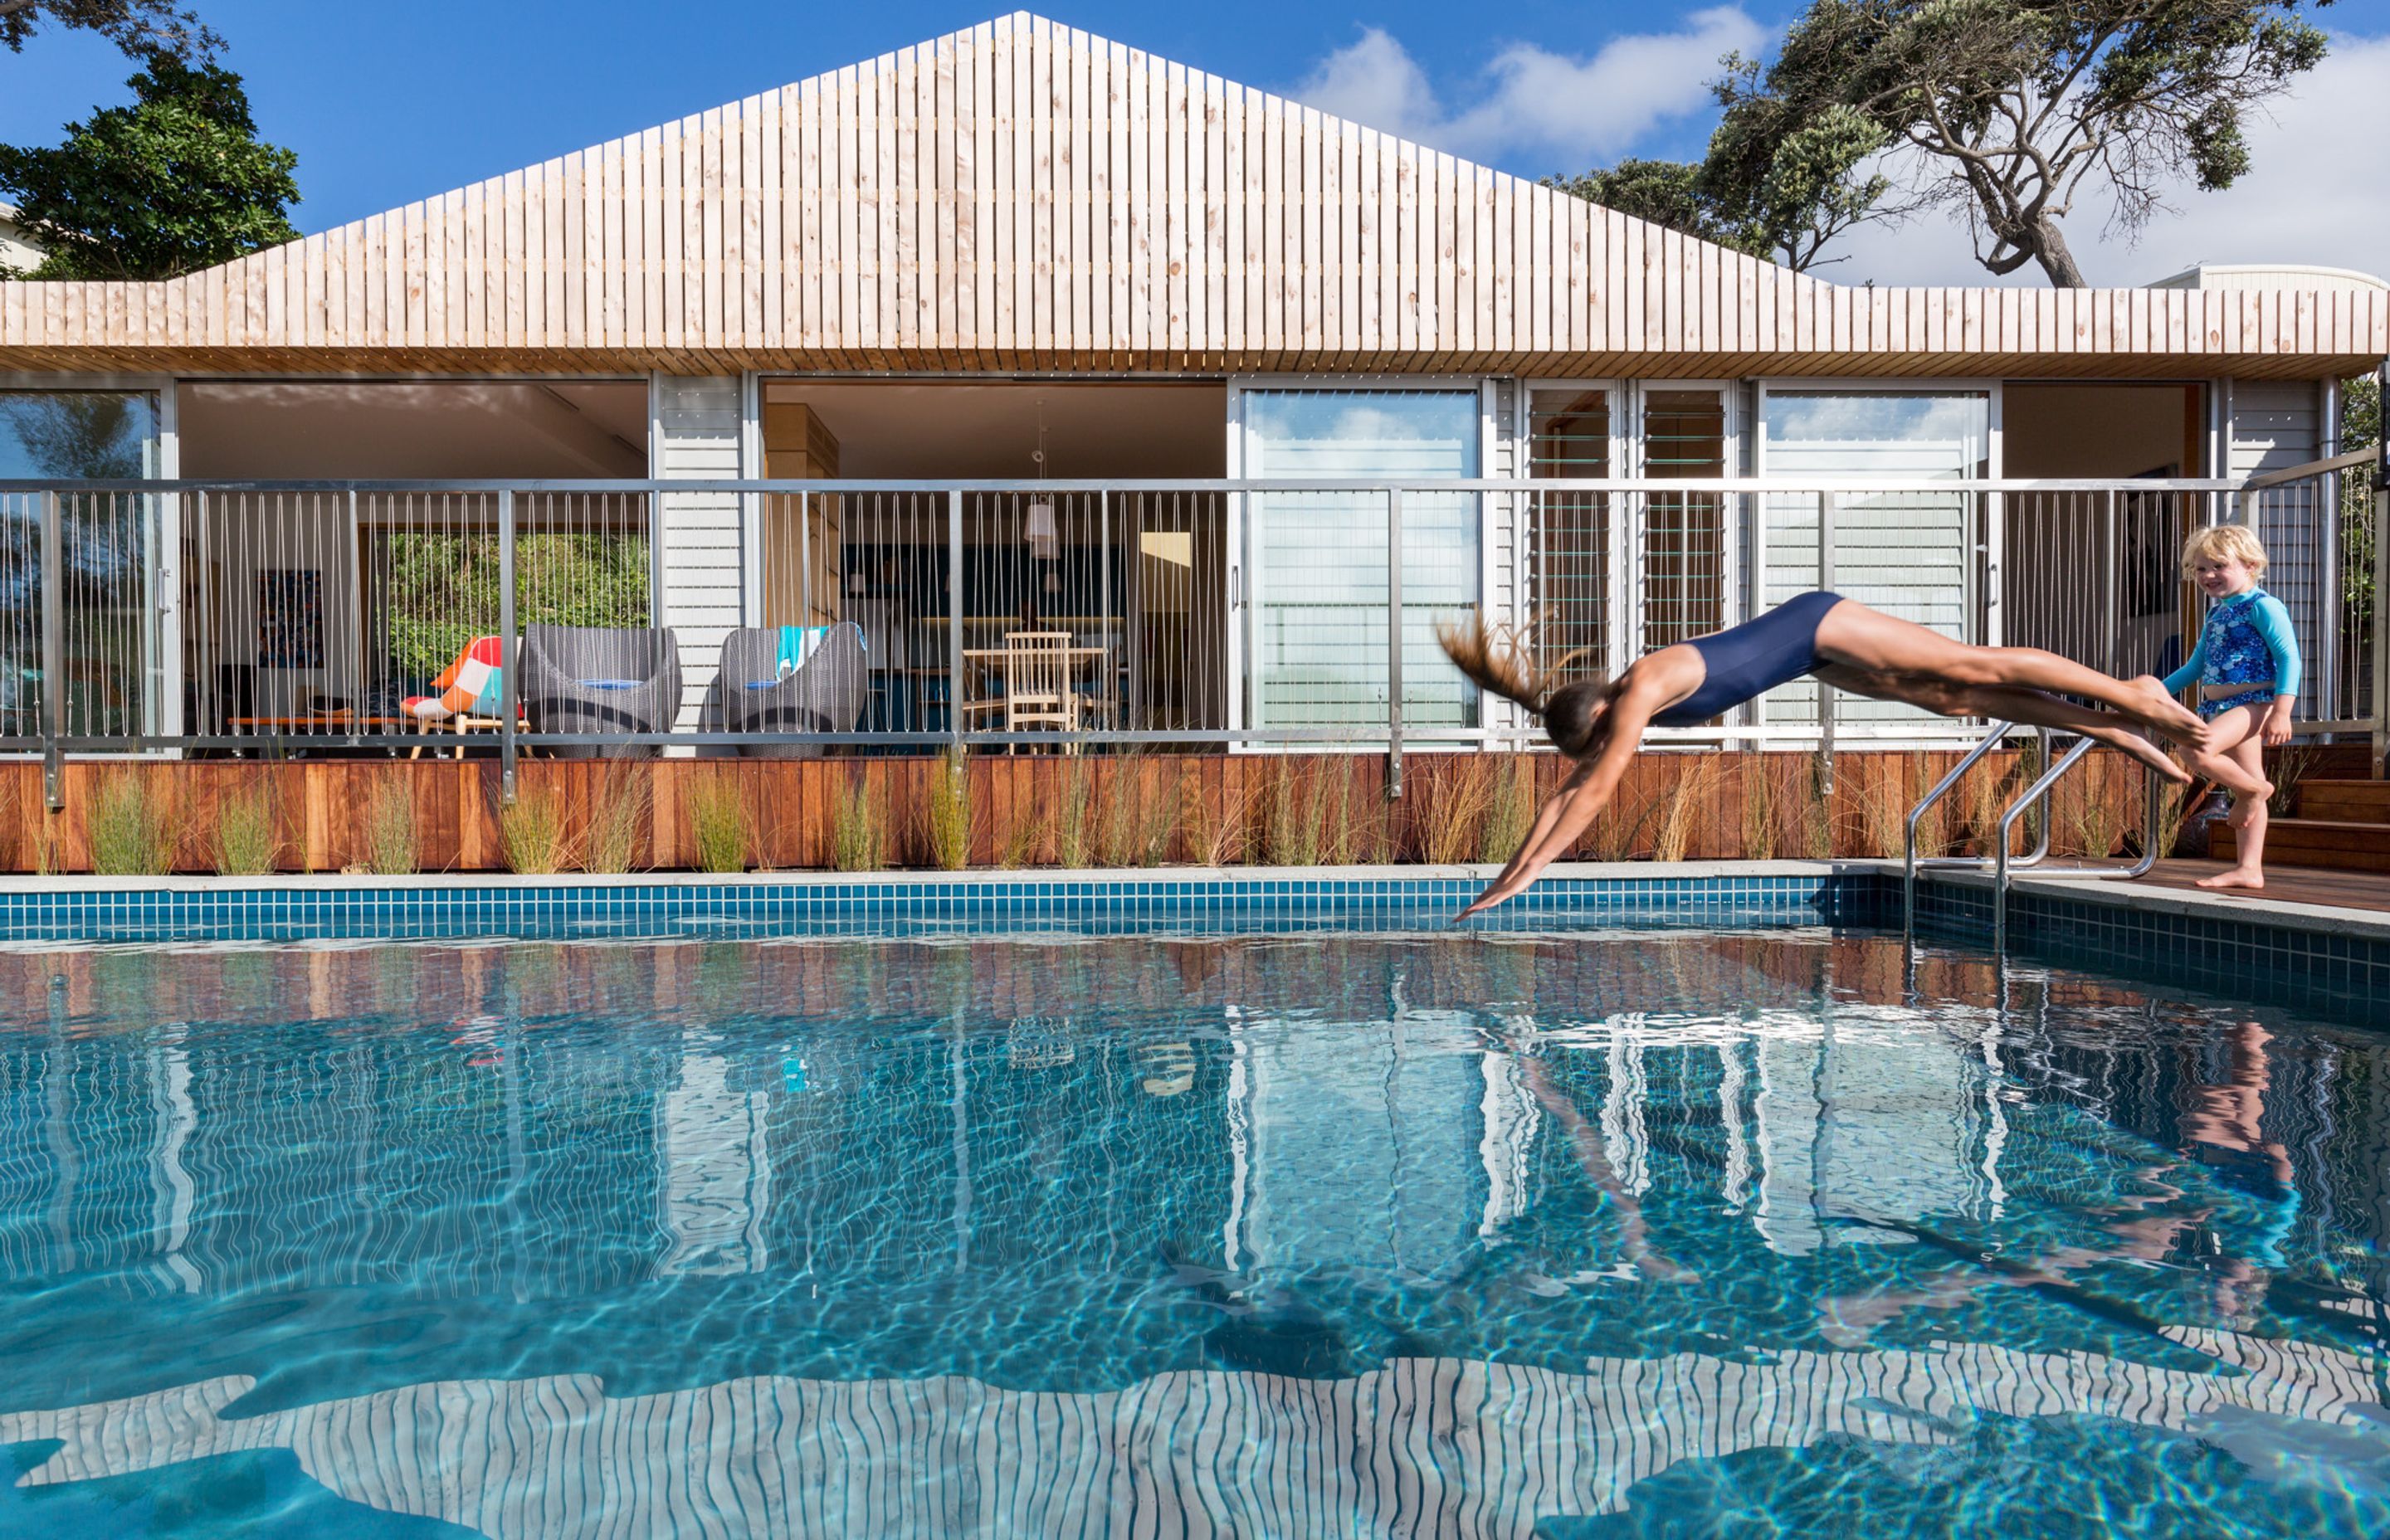 The swimming pool, added to the property in the 1950s has been fully refurbished. Bevelled weatherboards reference the original cottage while slatted macrocarpa elements add new definition and help mitigate excess solar gain.